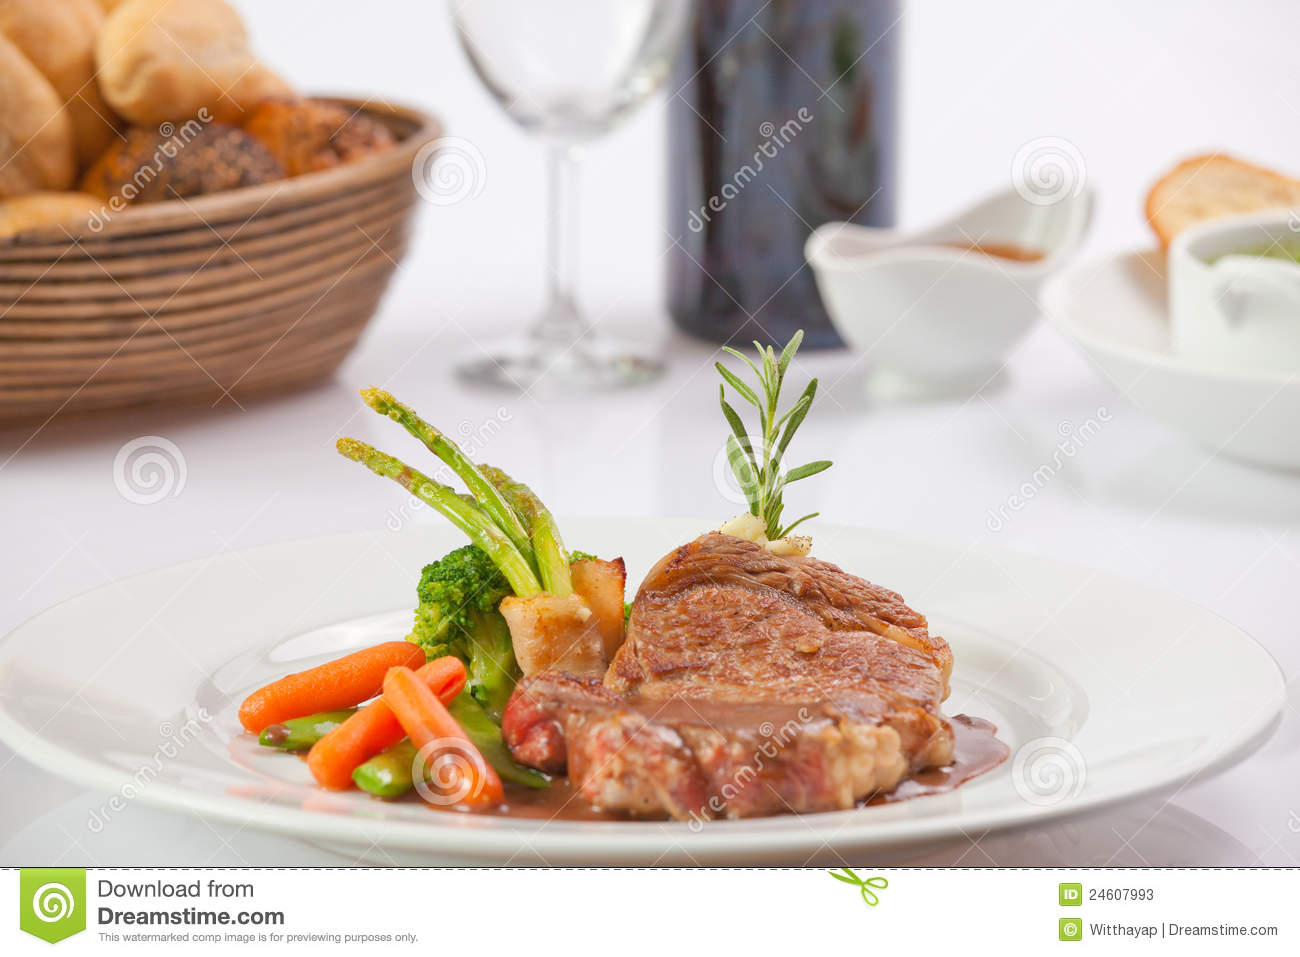 Grilled Steak Stock Photos   Image  24607993